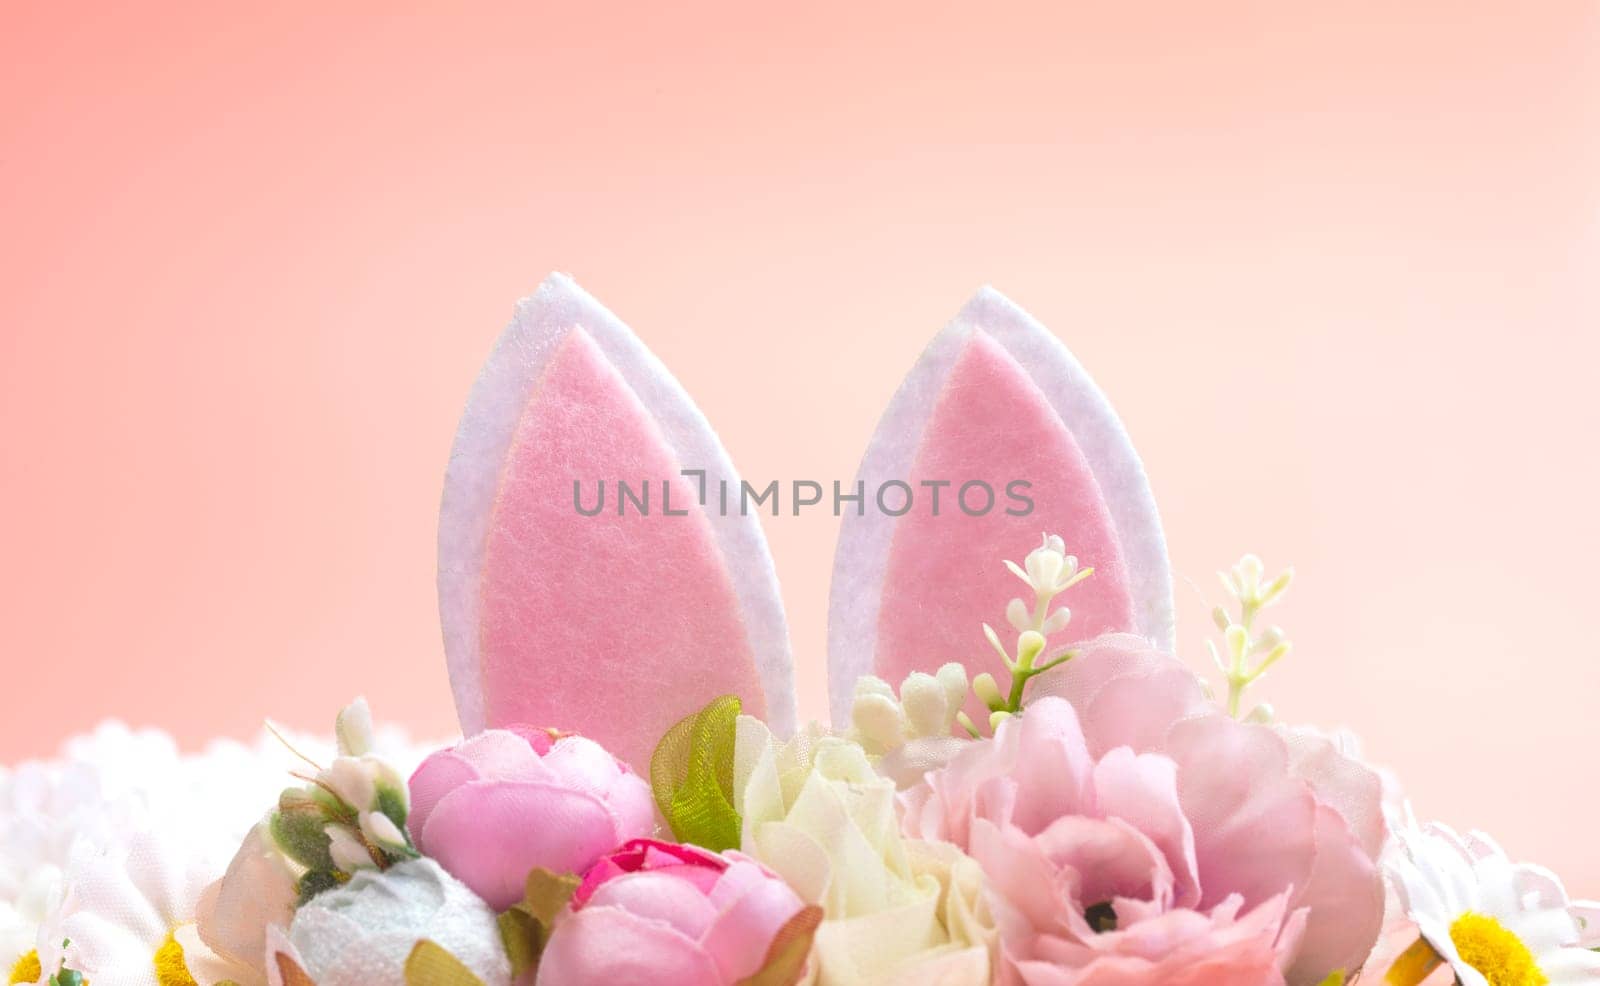 Spring holidays creative background with bunny ears decorated with bloom flowers on pastel pink theme. Creative copy space Easter concept by Annebel146